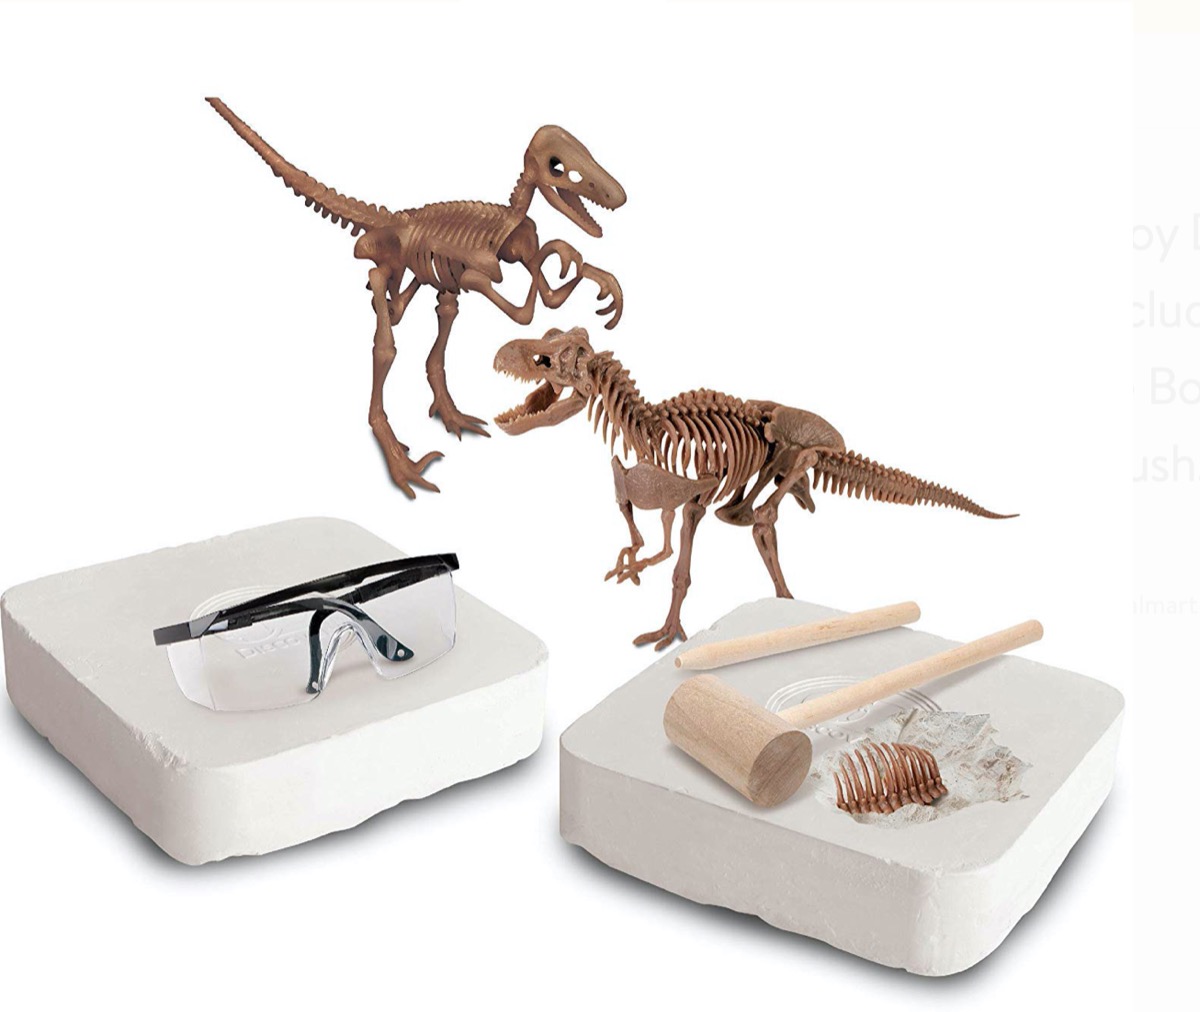 two toy dinosaurs and fossil digging kit